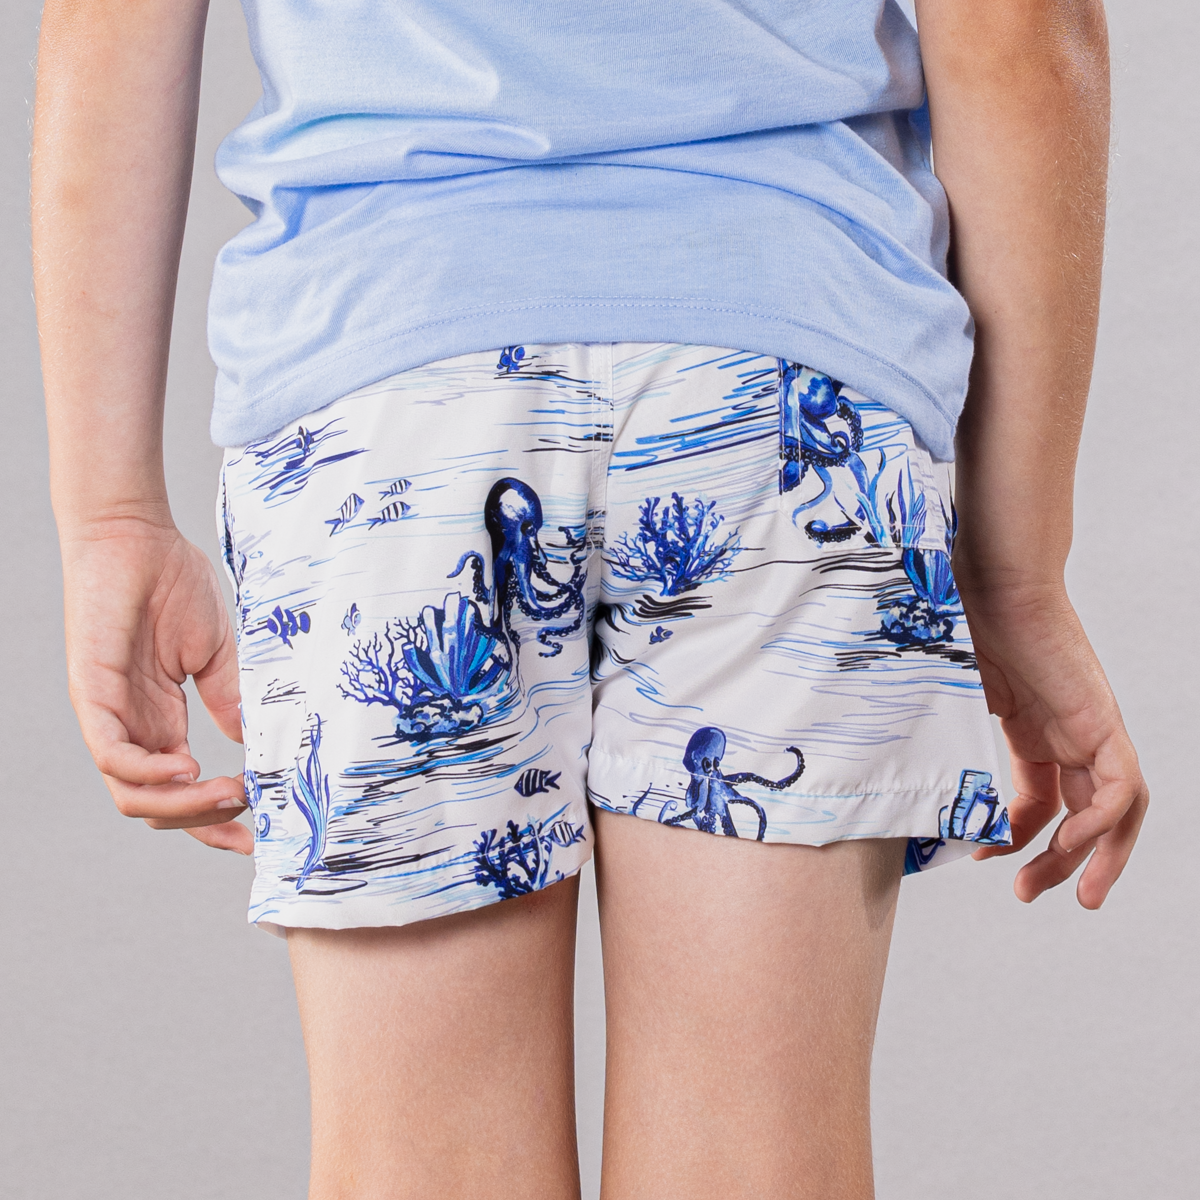 White swim trunks with octopi pattern for boys, back view